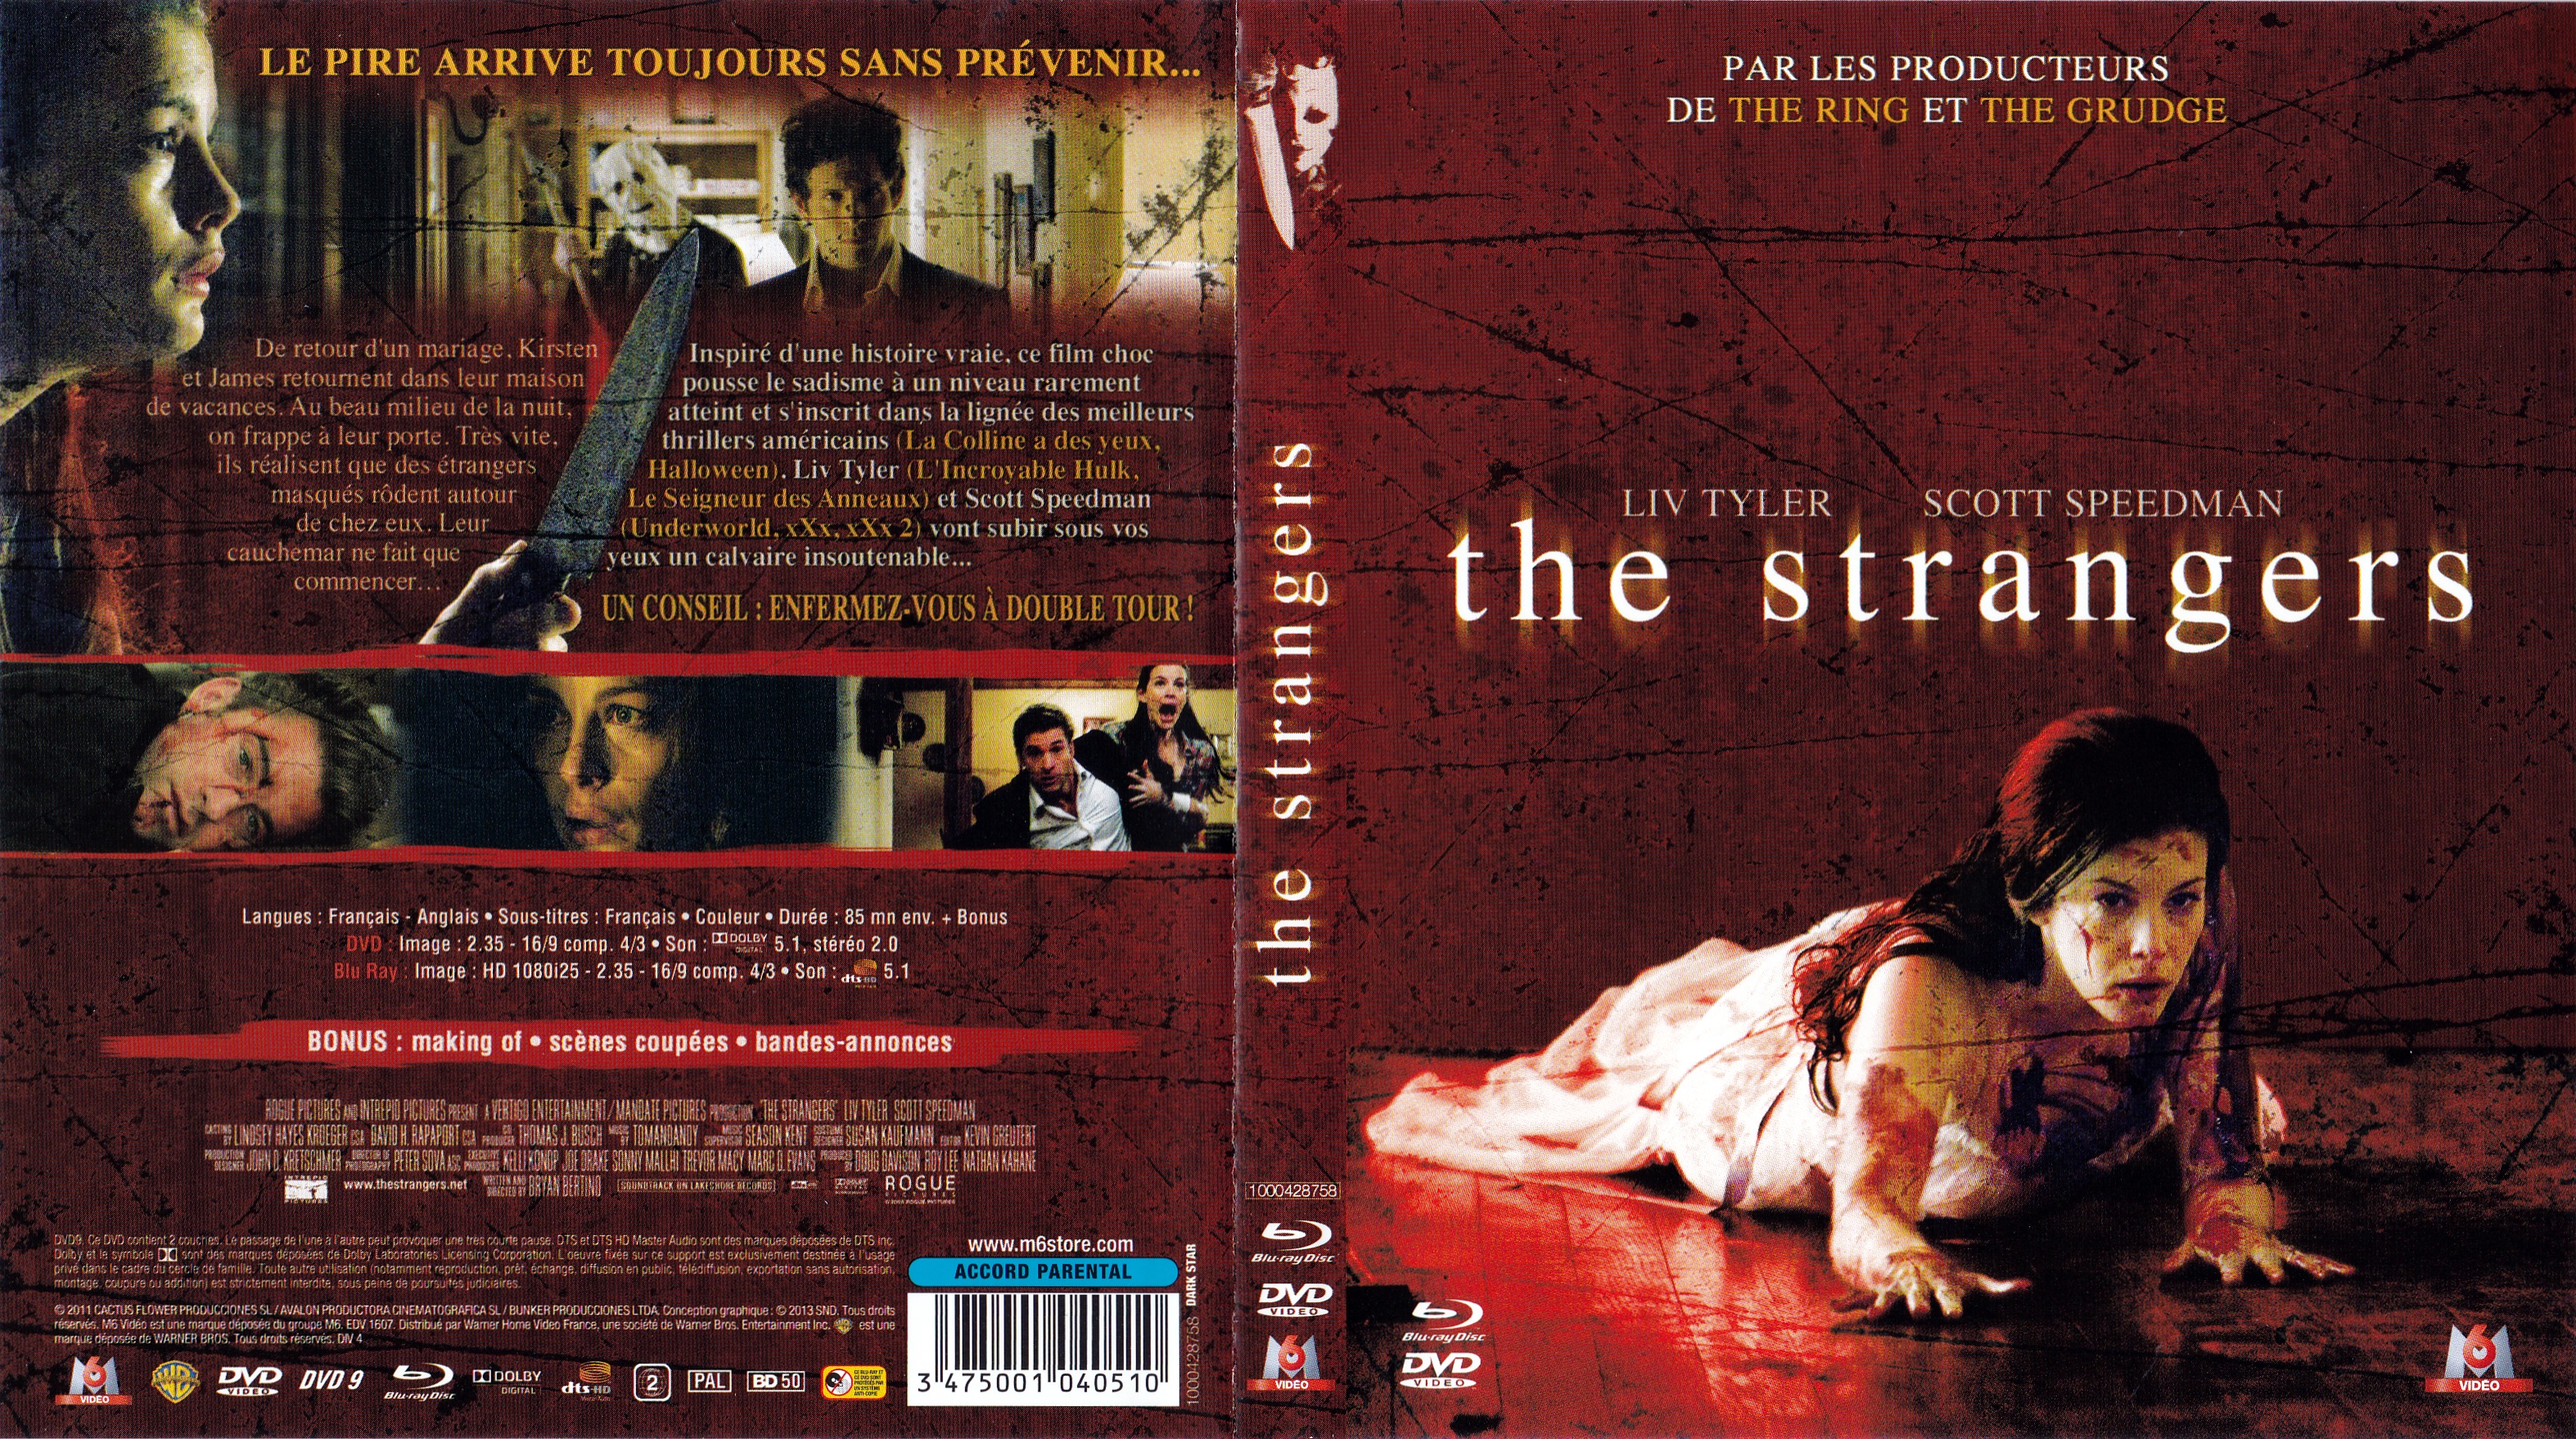 Jaquette DVD The strangers (BLU-RAY)